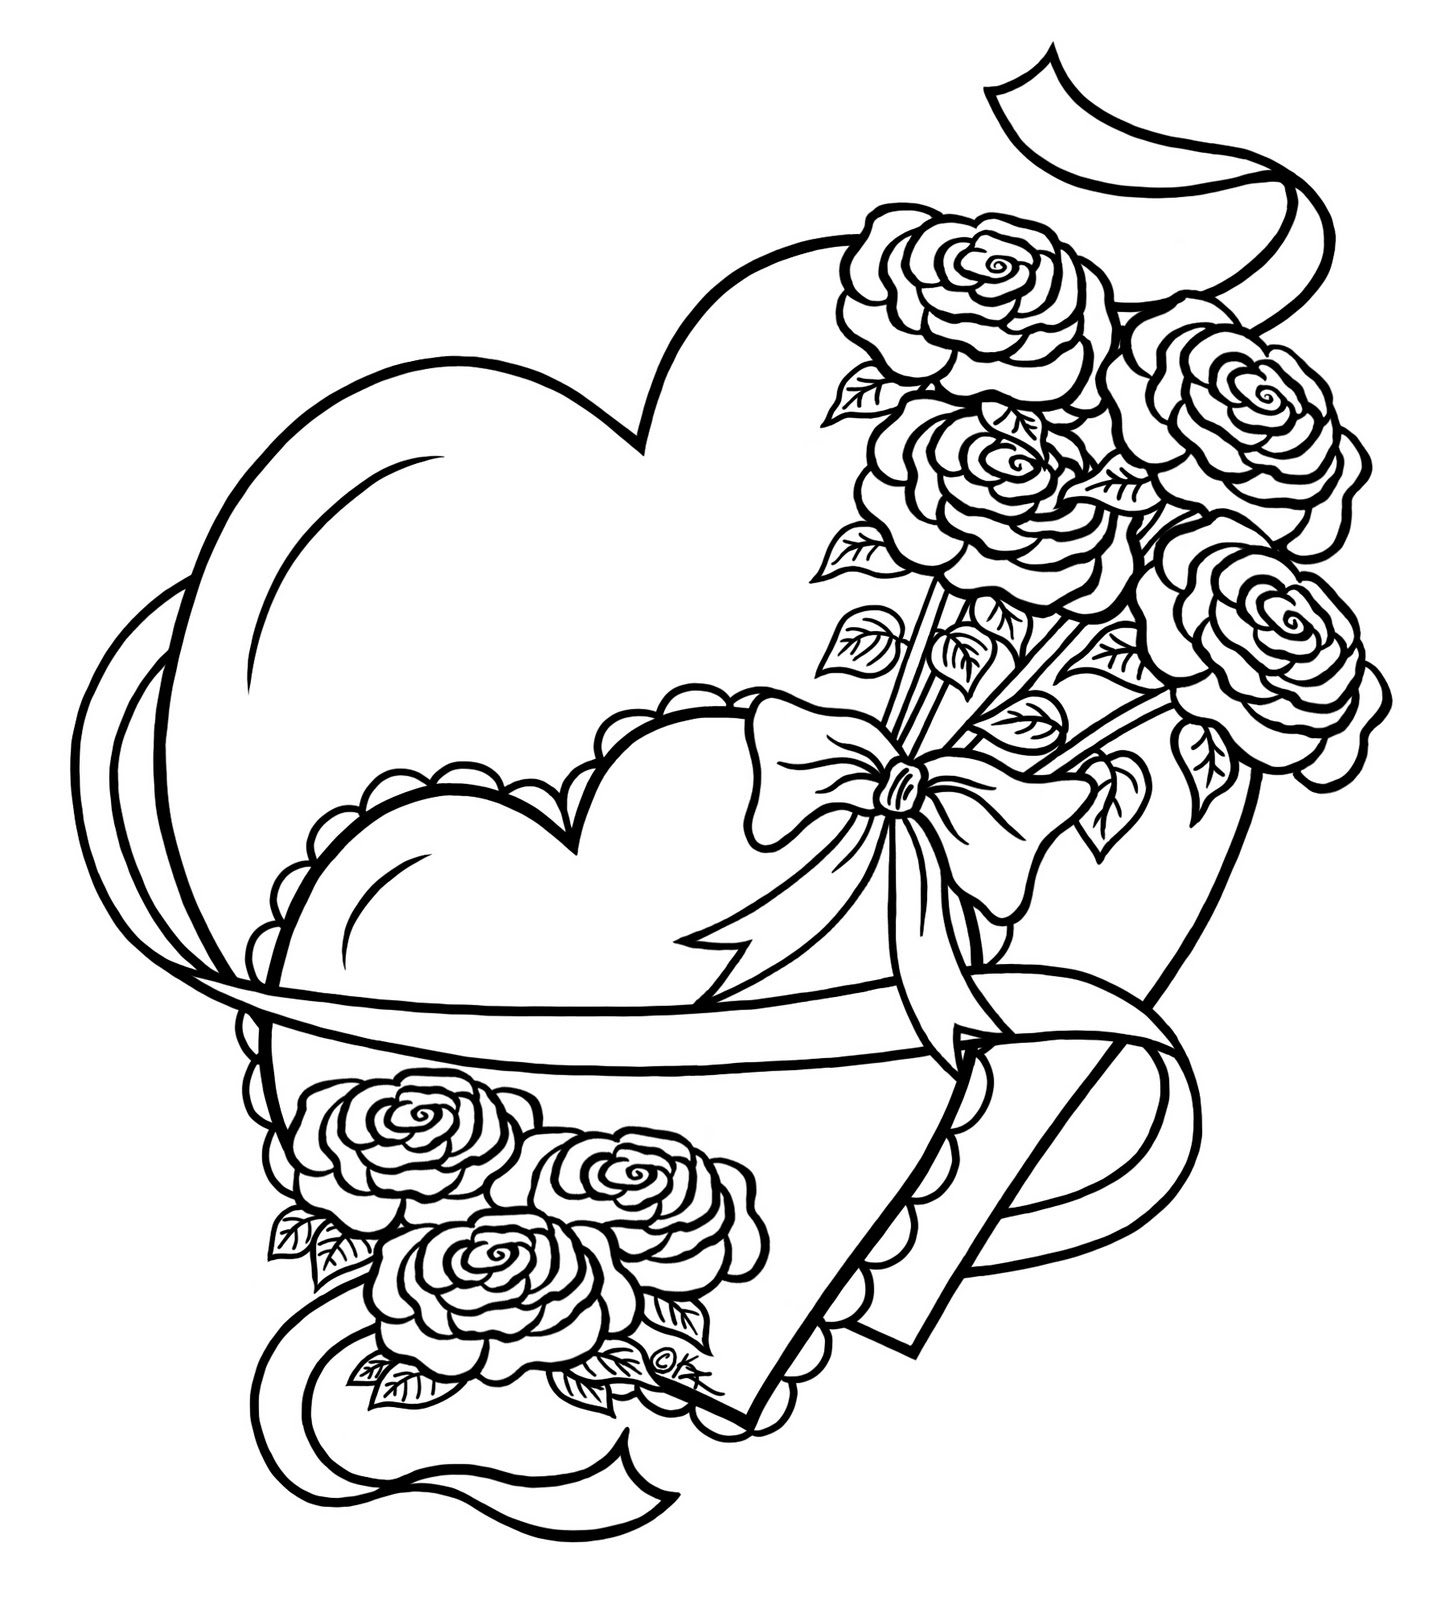 Cute Drawings Of Roses And Hearts | fashionplaceface.